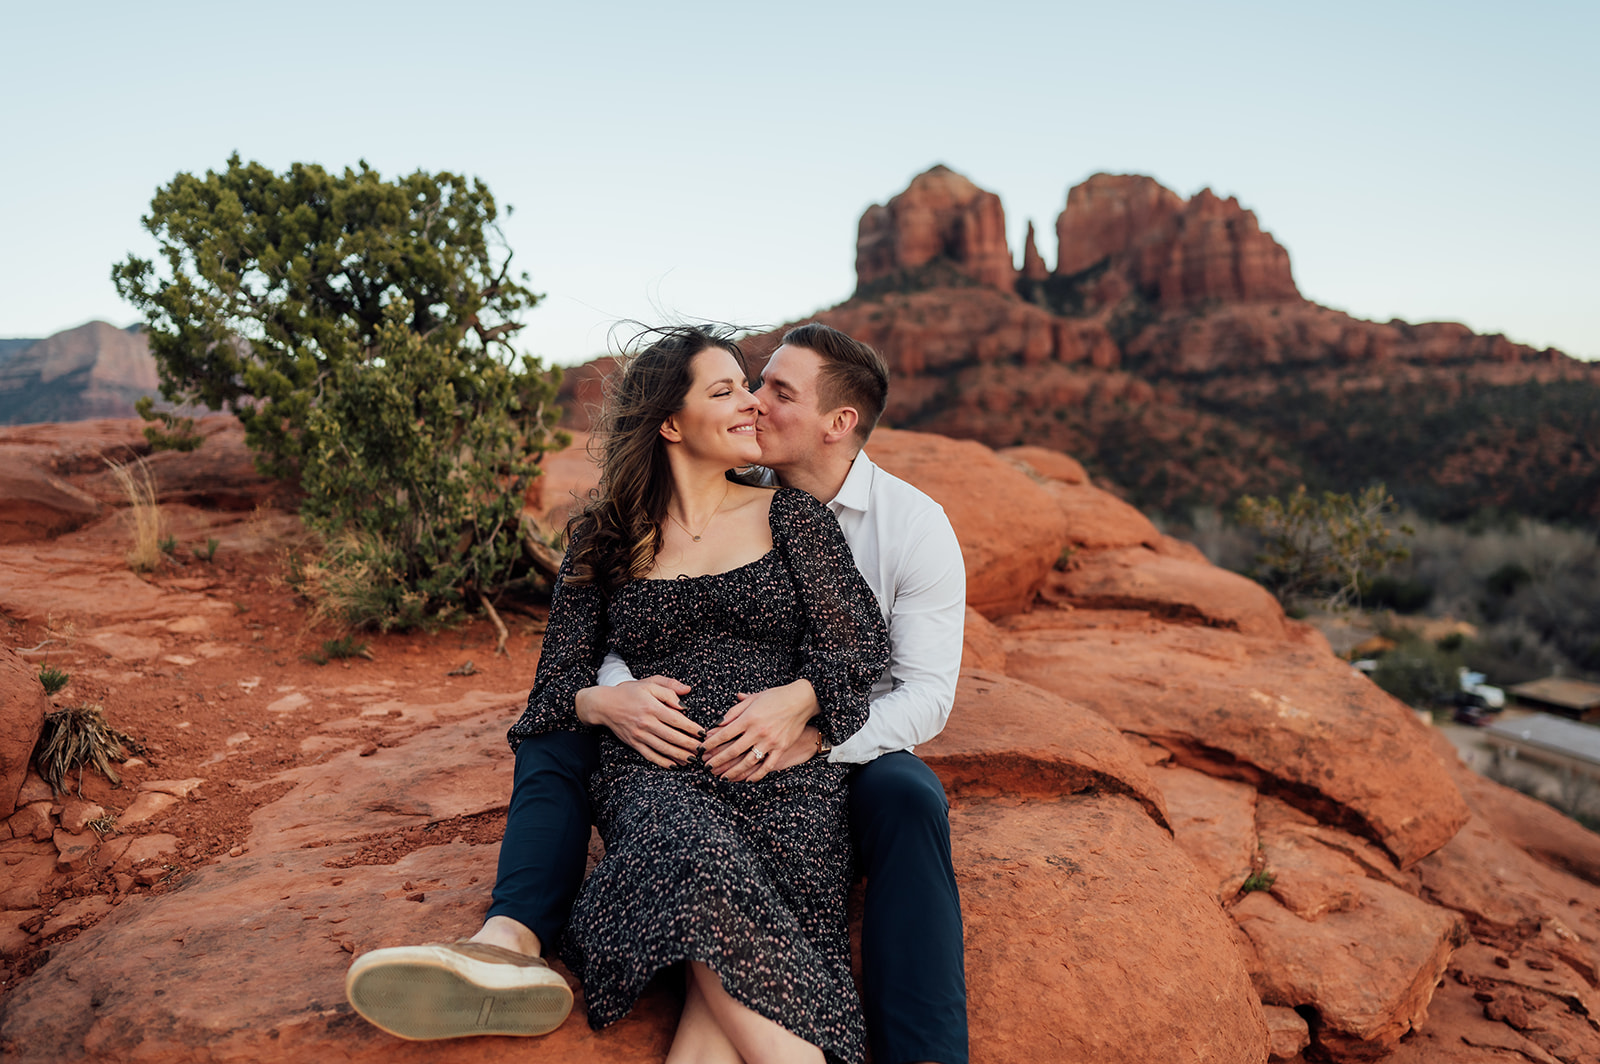 Man kisses wife's cheek while holding her in his arms with views of Cathedral rock in Sedona behind.